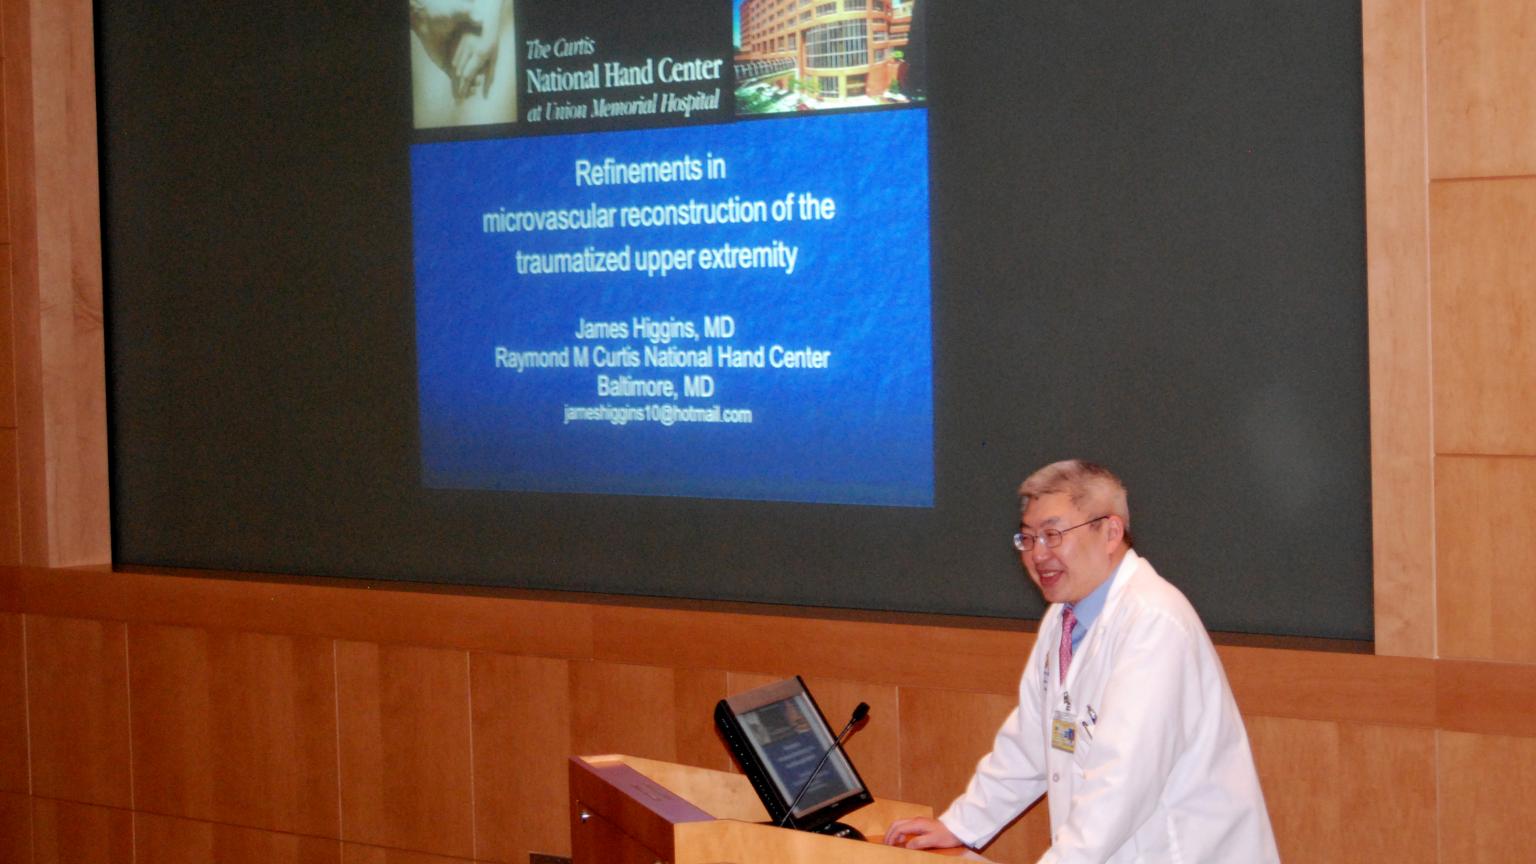 Dr. Chung speaking at a podium